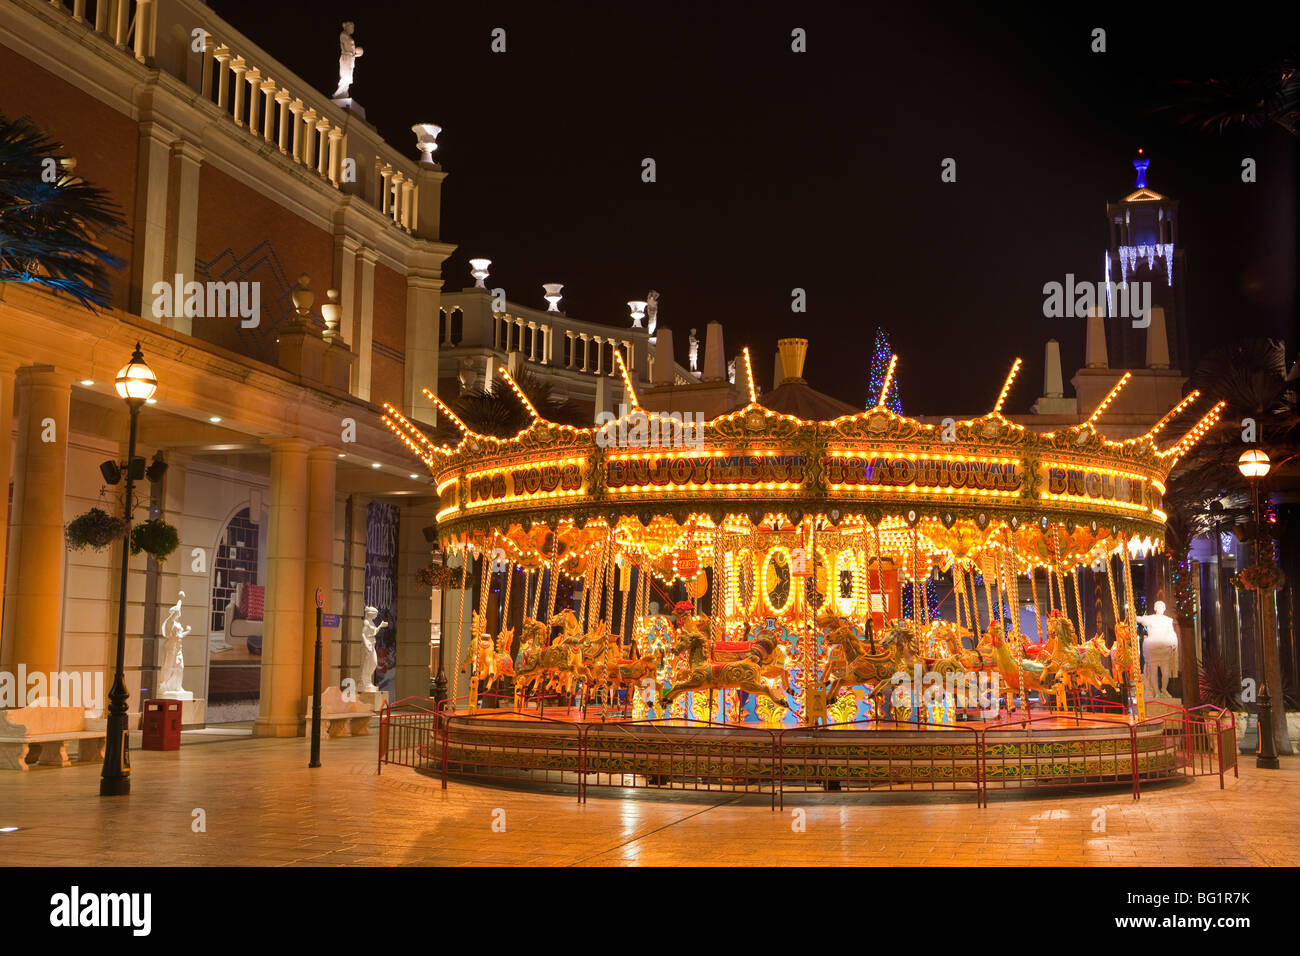 Royaume-uni, Angleterre, Manchester, Trafford Centre Shopping Mall, Barton Square, carrousel traditionnel Banque D'Images